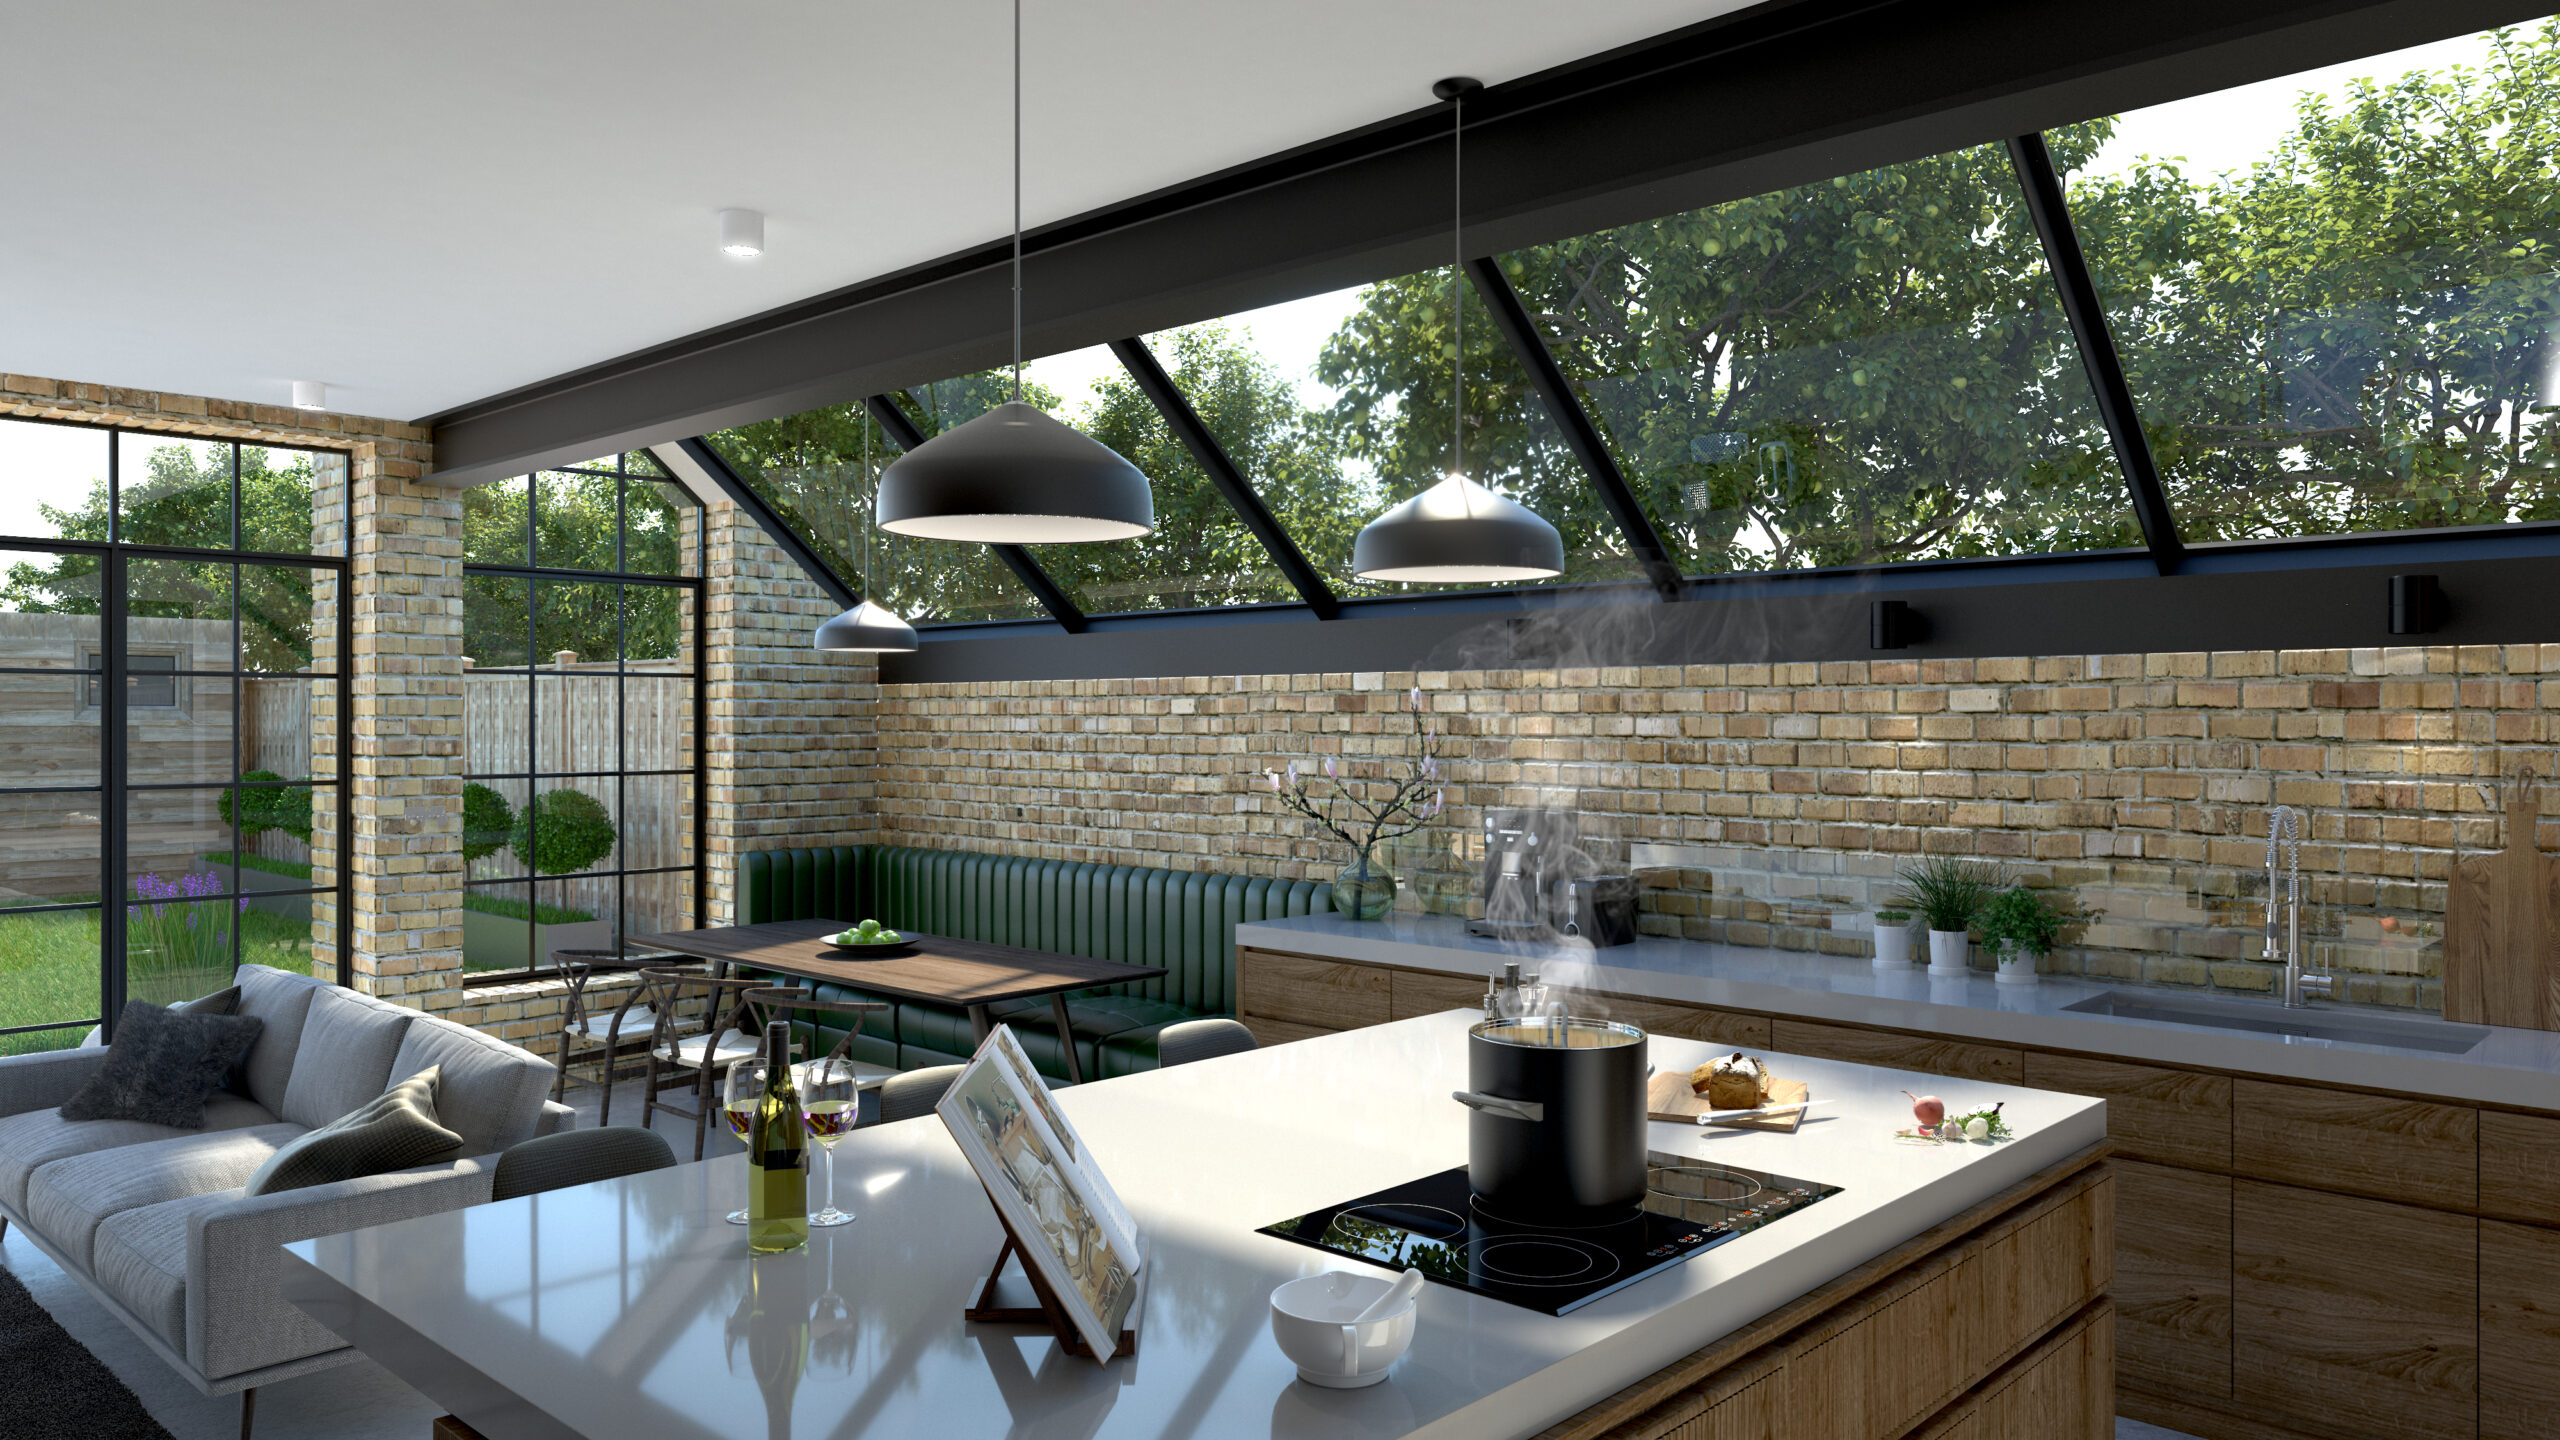 Architectural Images KITCHEN-25-0006